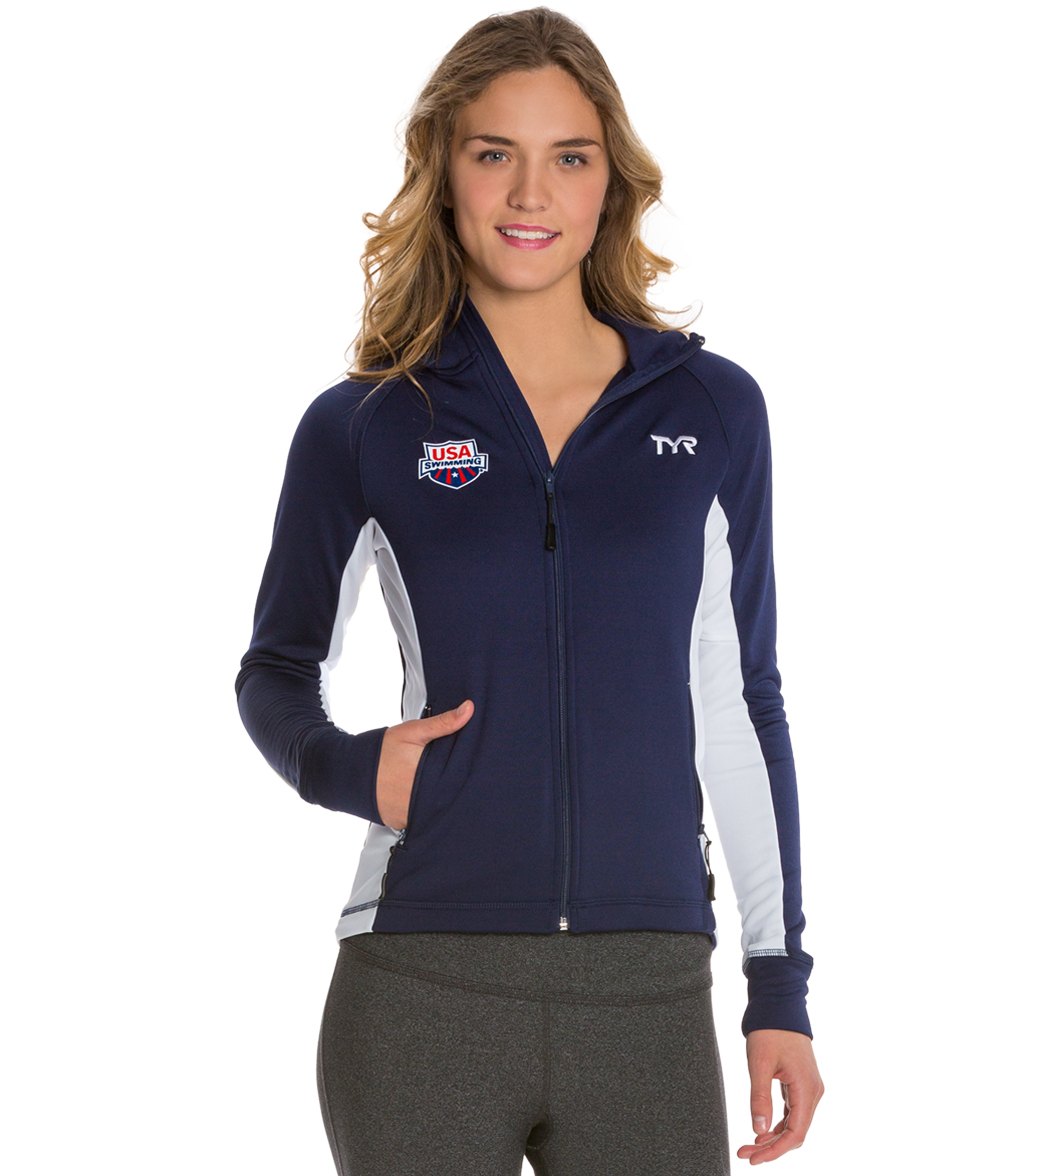 Usa Swimming TYR Women's Alliance Victory Warm Up Jacket - Navy/White Large Polyester - Swimoutlet.com